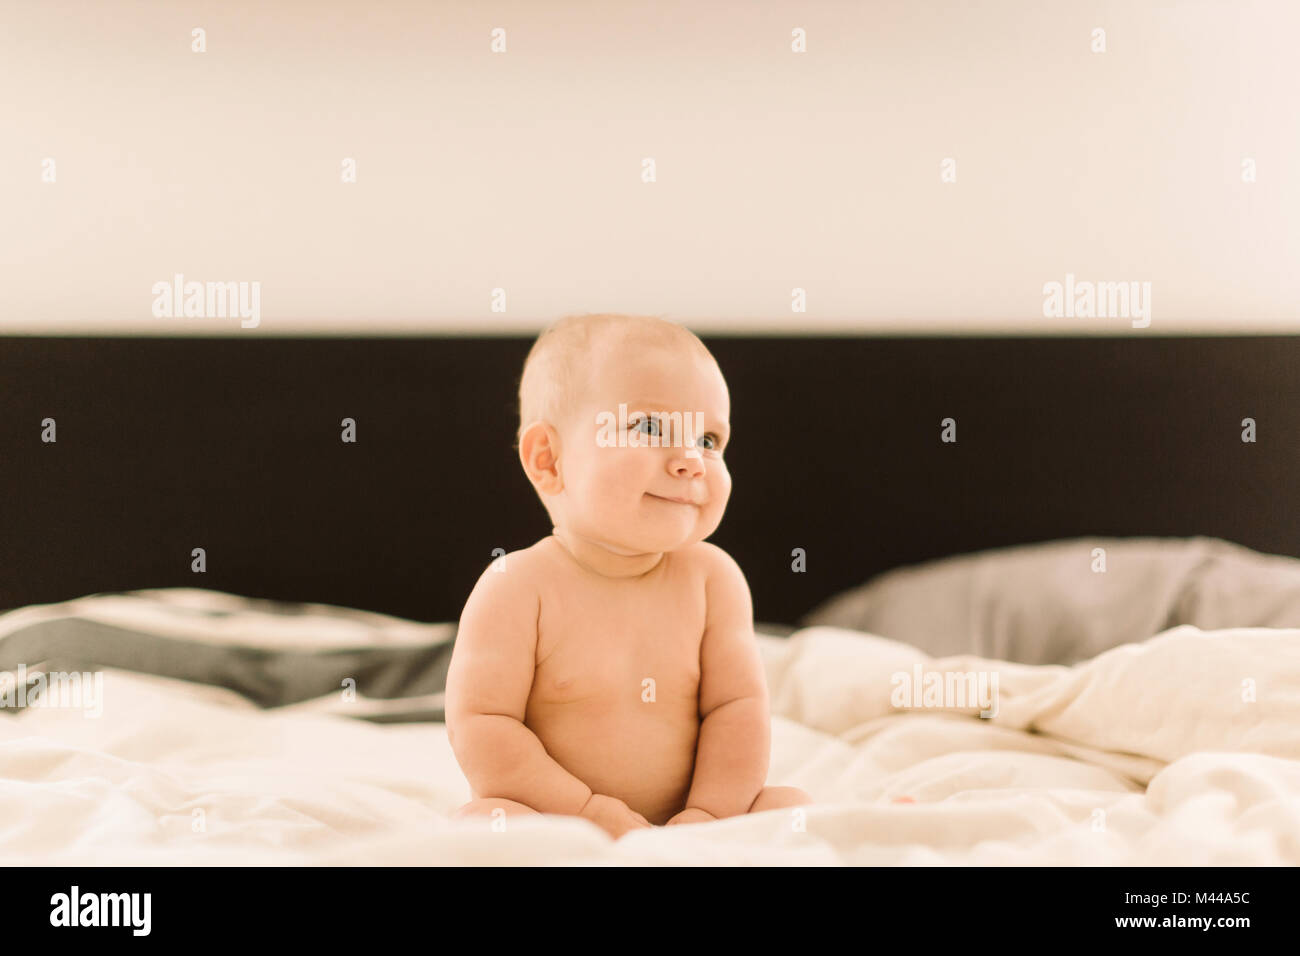 Cute baby girl sitting up on bed looking away Stock Photo